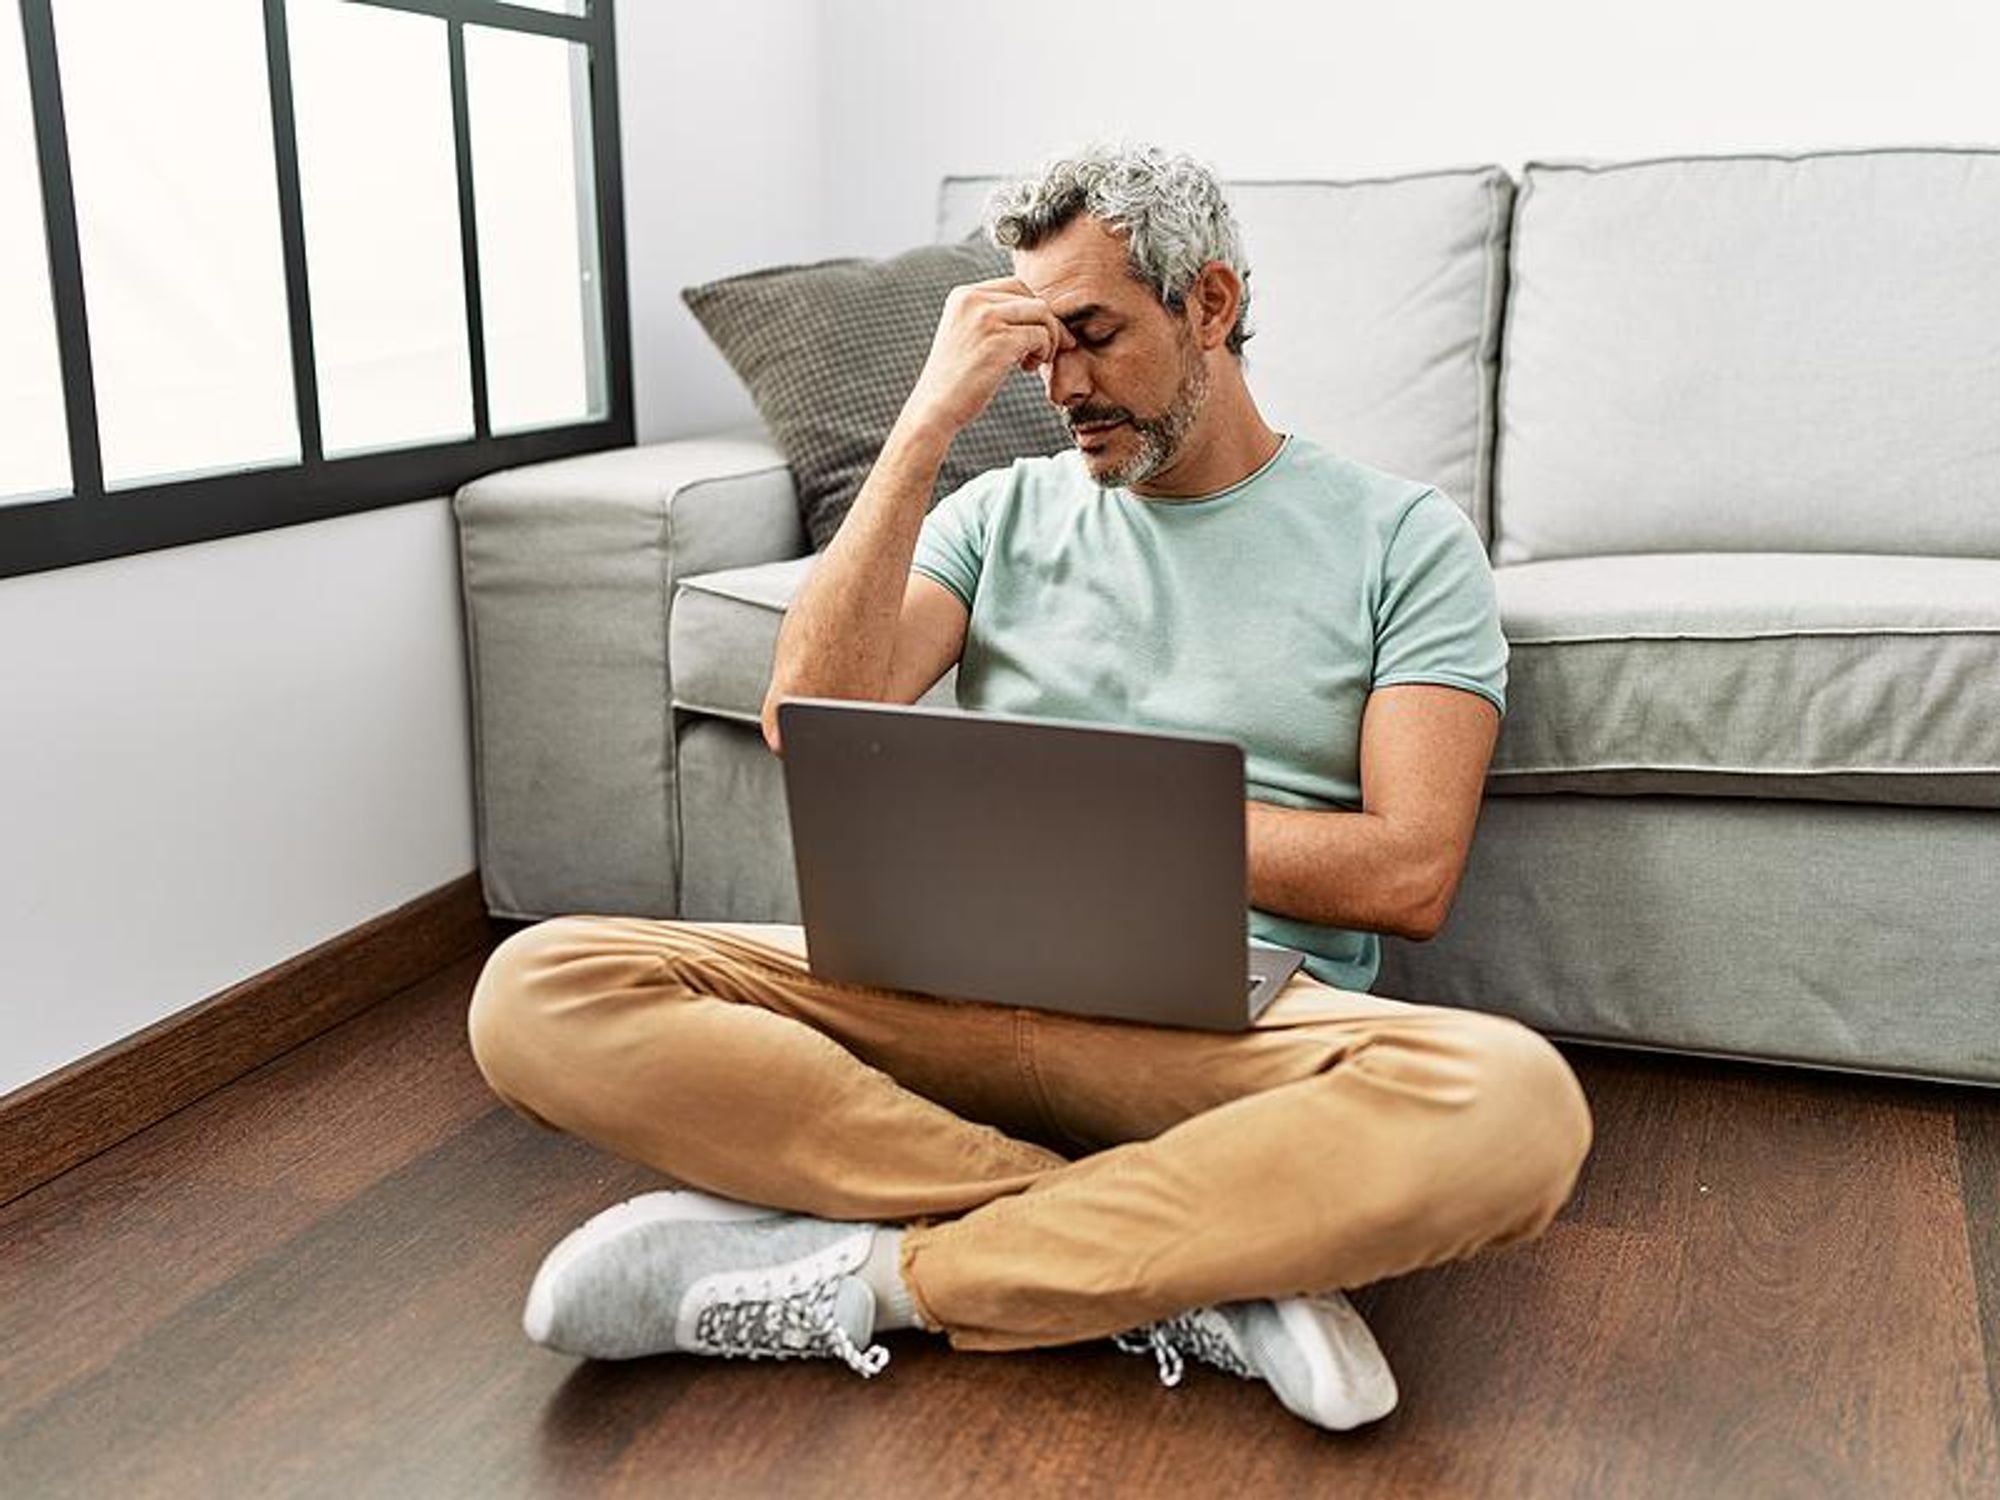 Man on laptop stressed about finding a new job